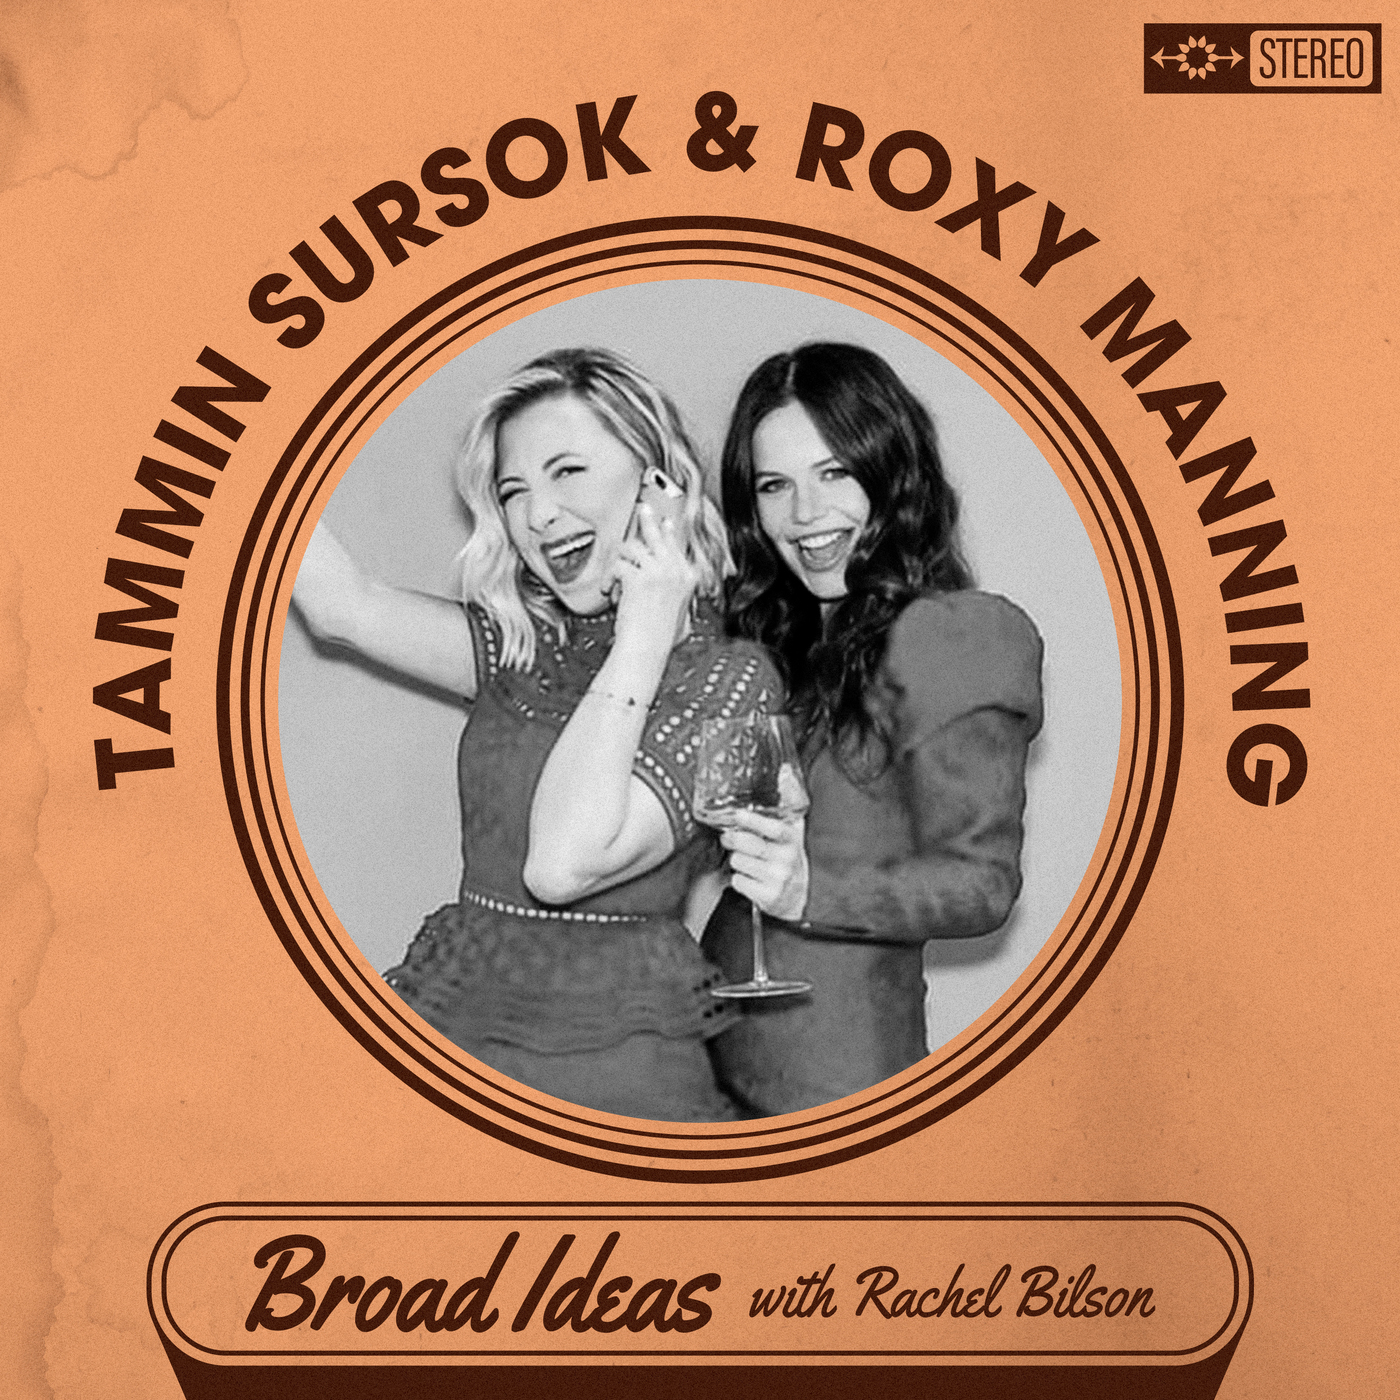 Tammin Sursok & Roxy Manning on Ovulating, Bad One Night Stands, and Slipping on Sperm